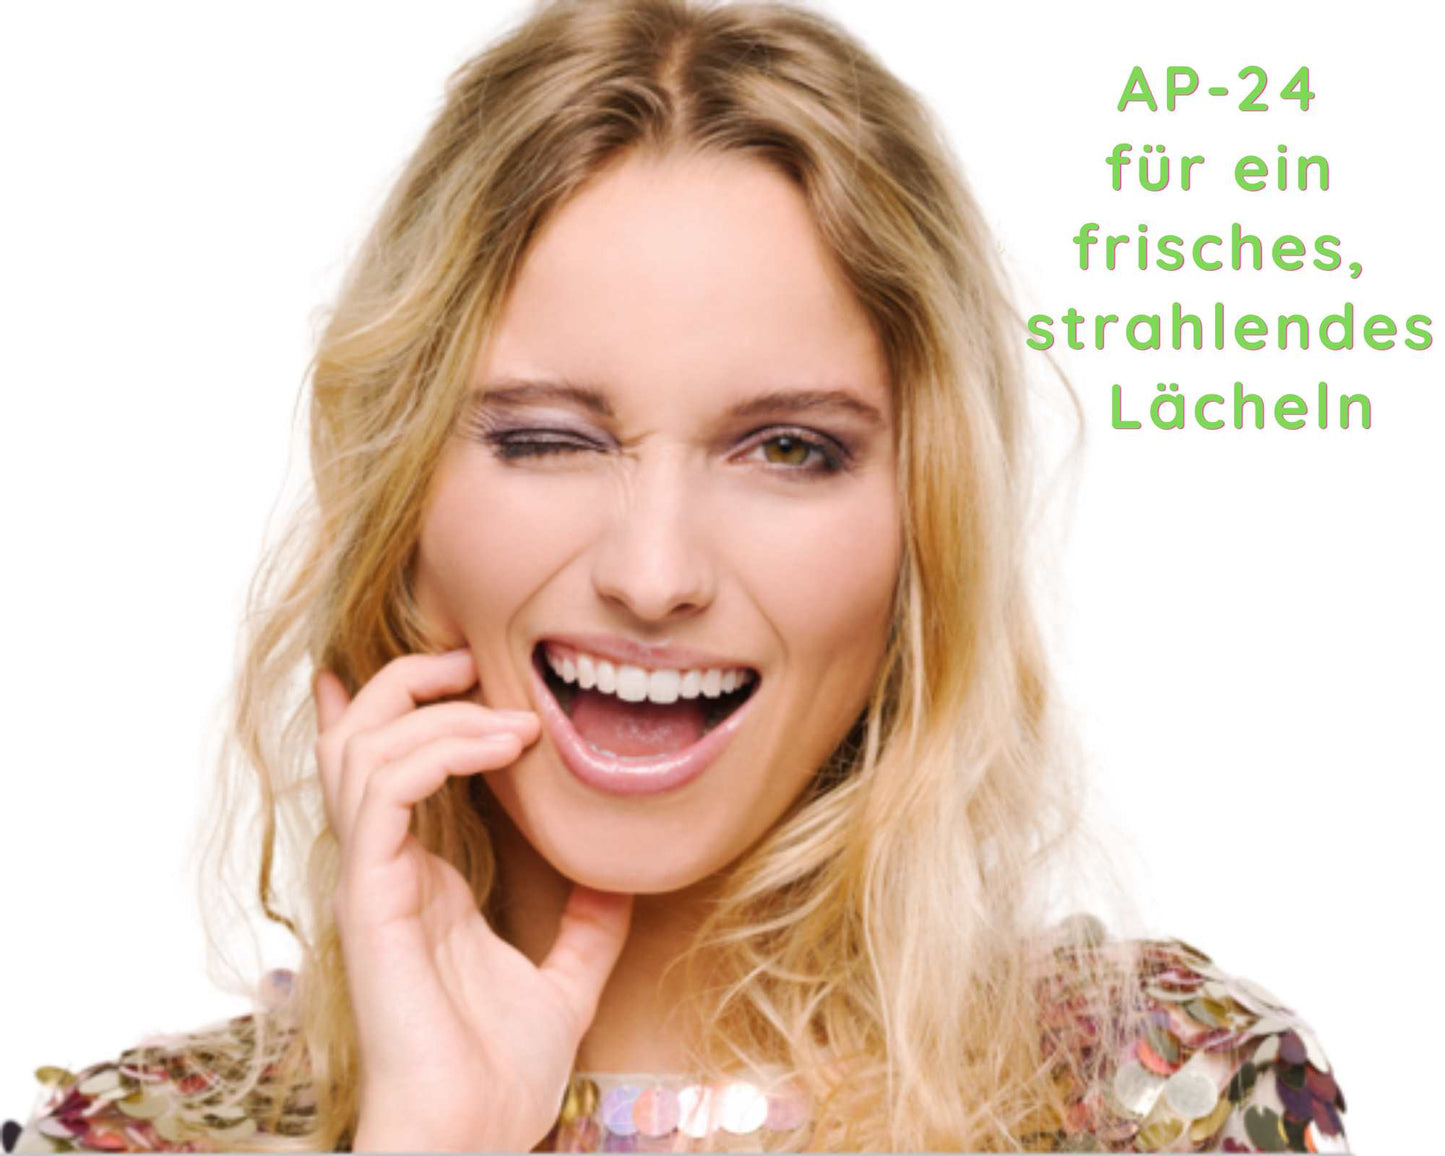 Woman with beautiful white teeth - Ap-24 for a fresh, bright smile